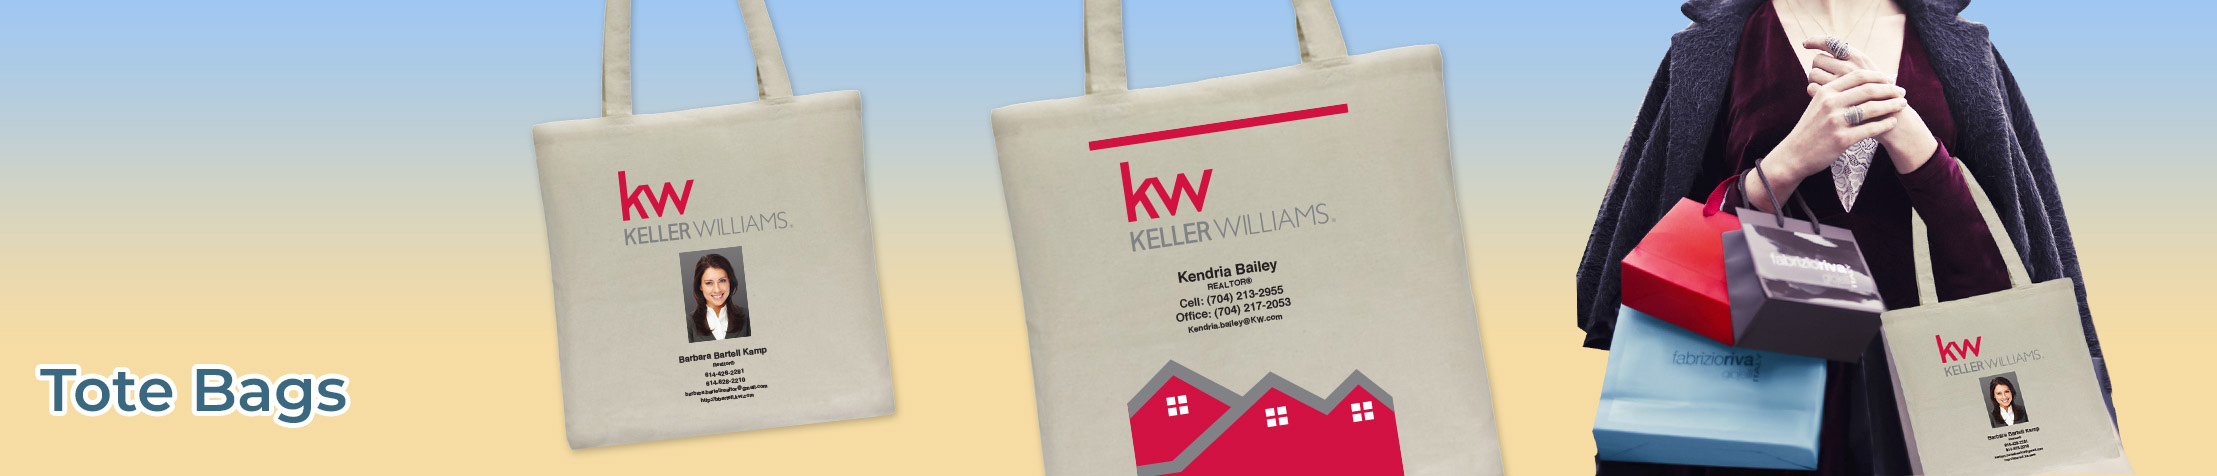 Keller Williams Real Estate Tote Bags - KW approved vendor personalized realtor promotional products | BestPrintBuy.com